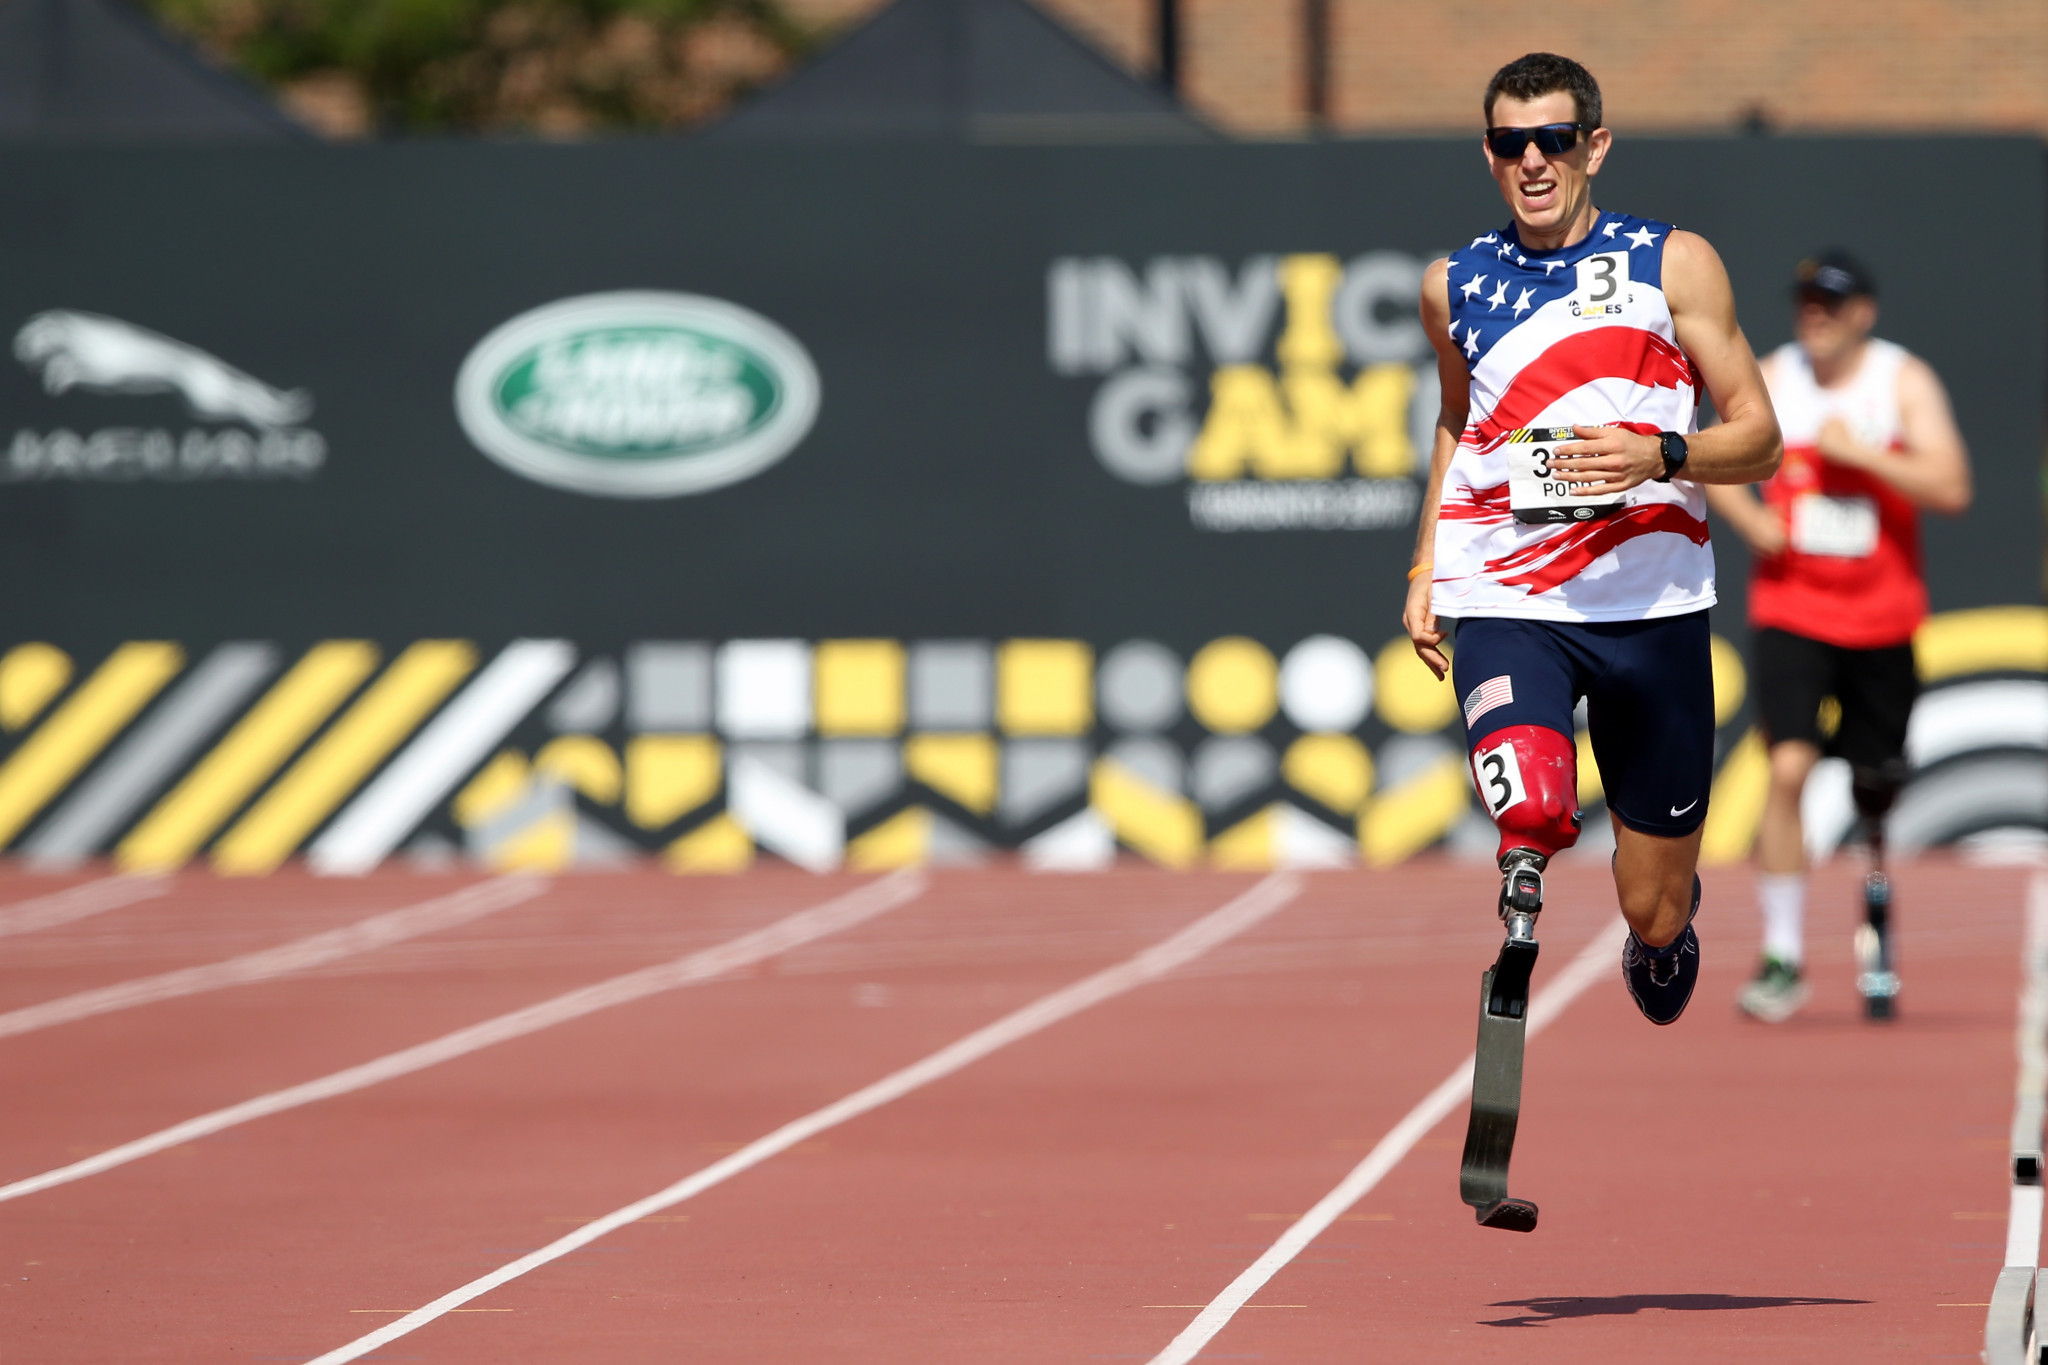 United States dominate final day of Invictus Games athletics competition 